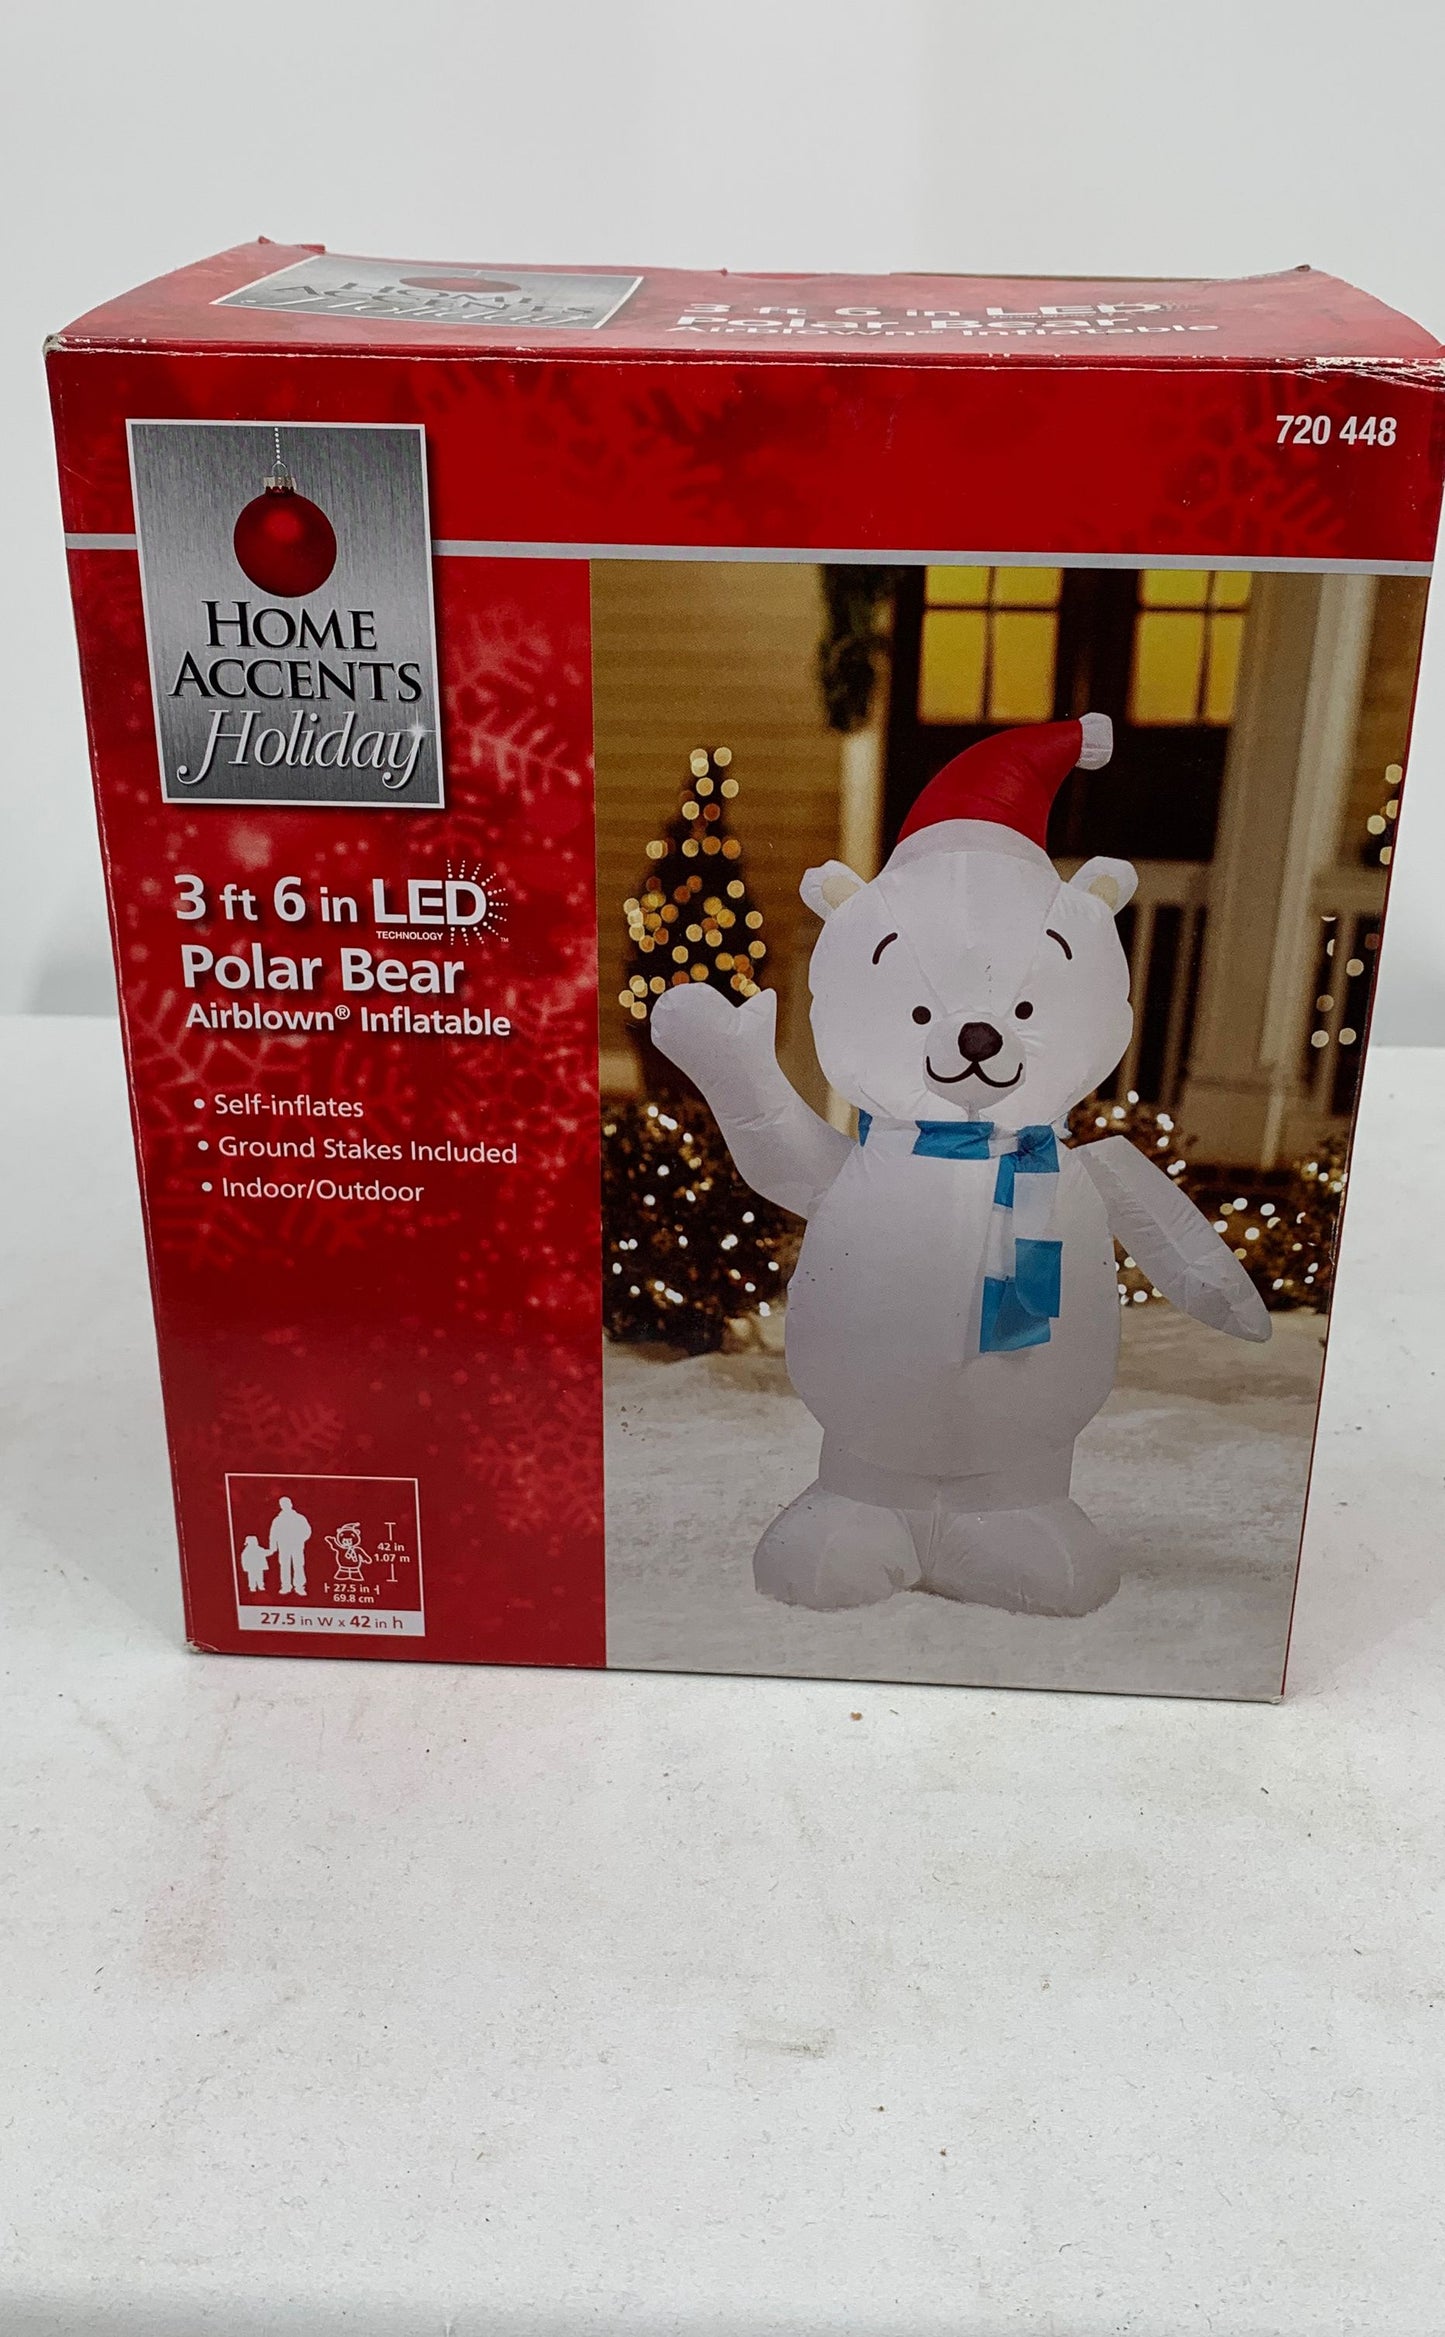 Home Accents Holiday 3' 6" In LED Polar Bear Airblown Inflatable